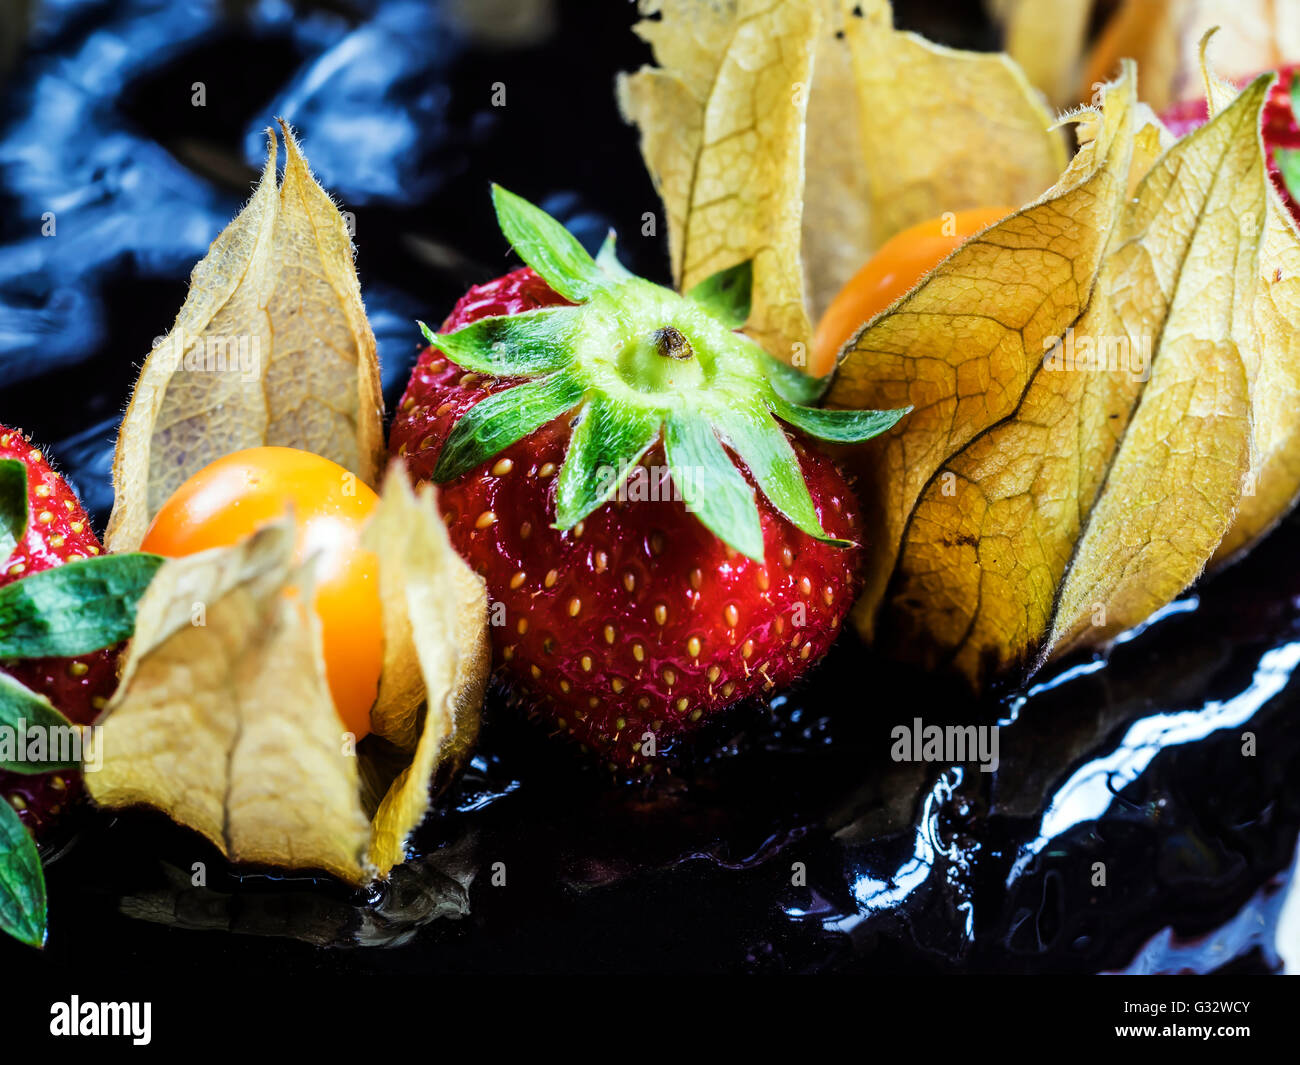 Close-up of strawberries and physalis fruit on chocolate cake Stock Photo